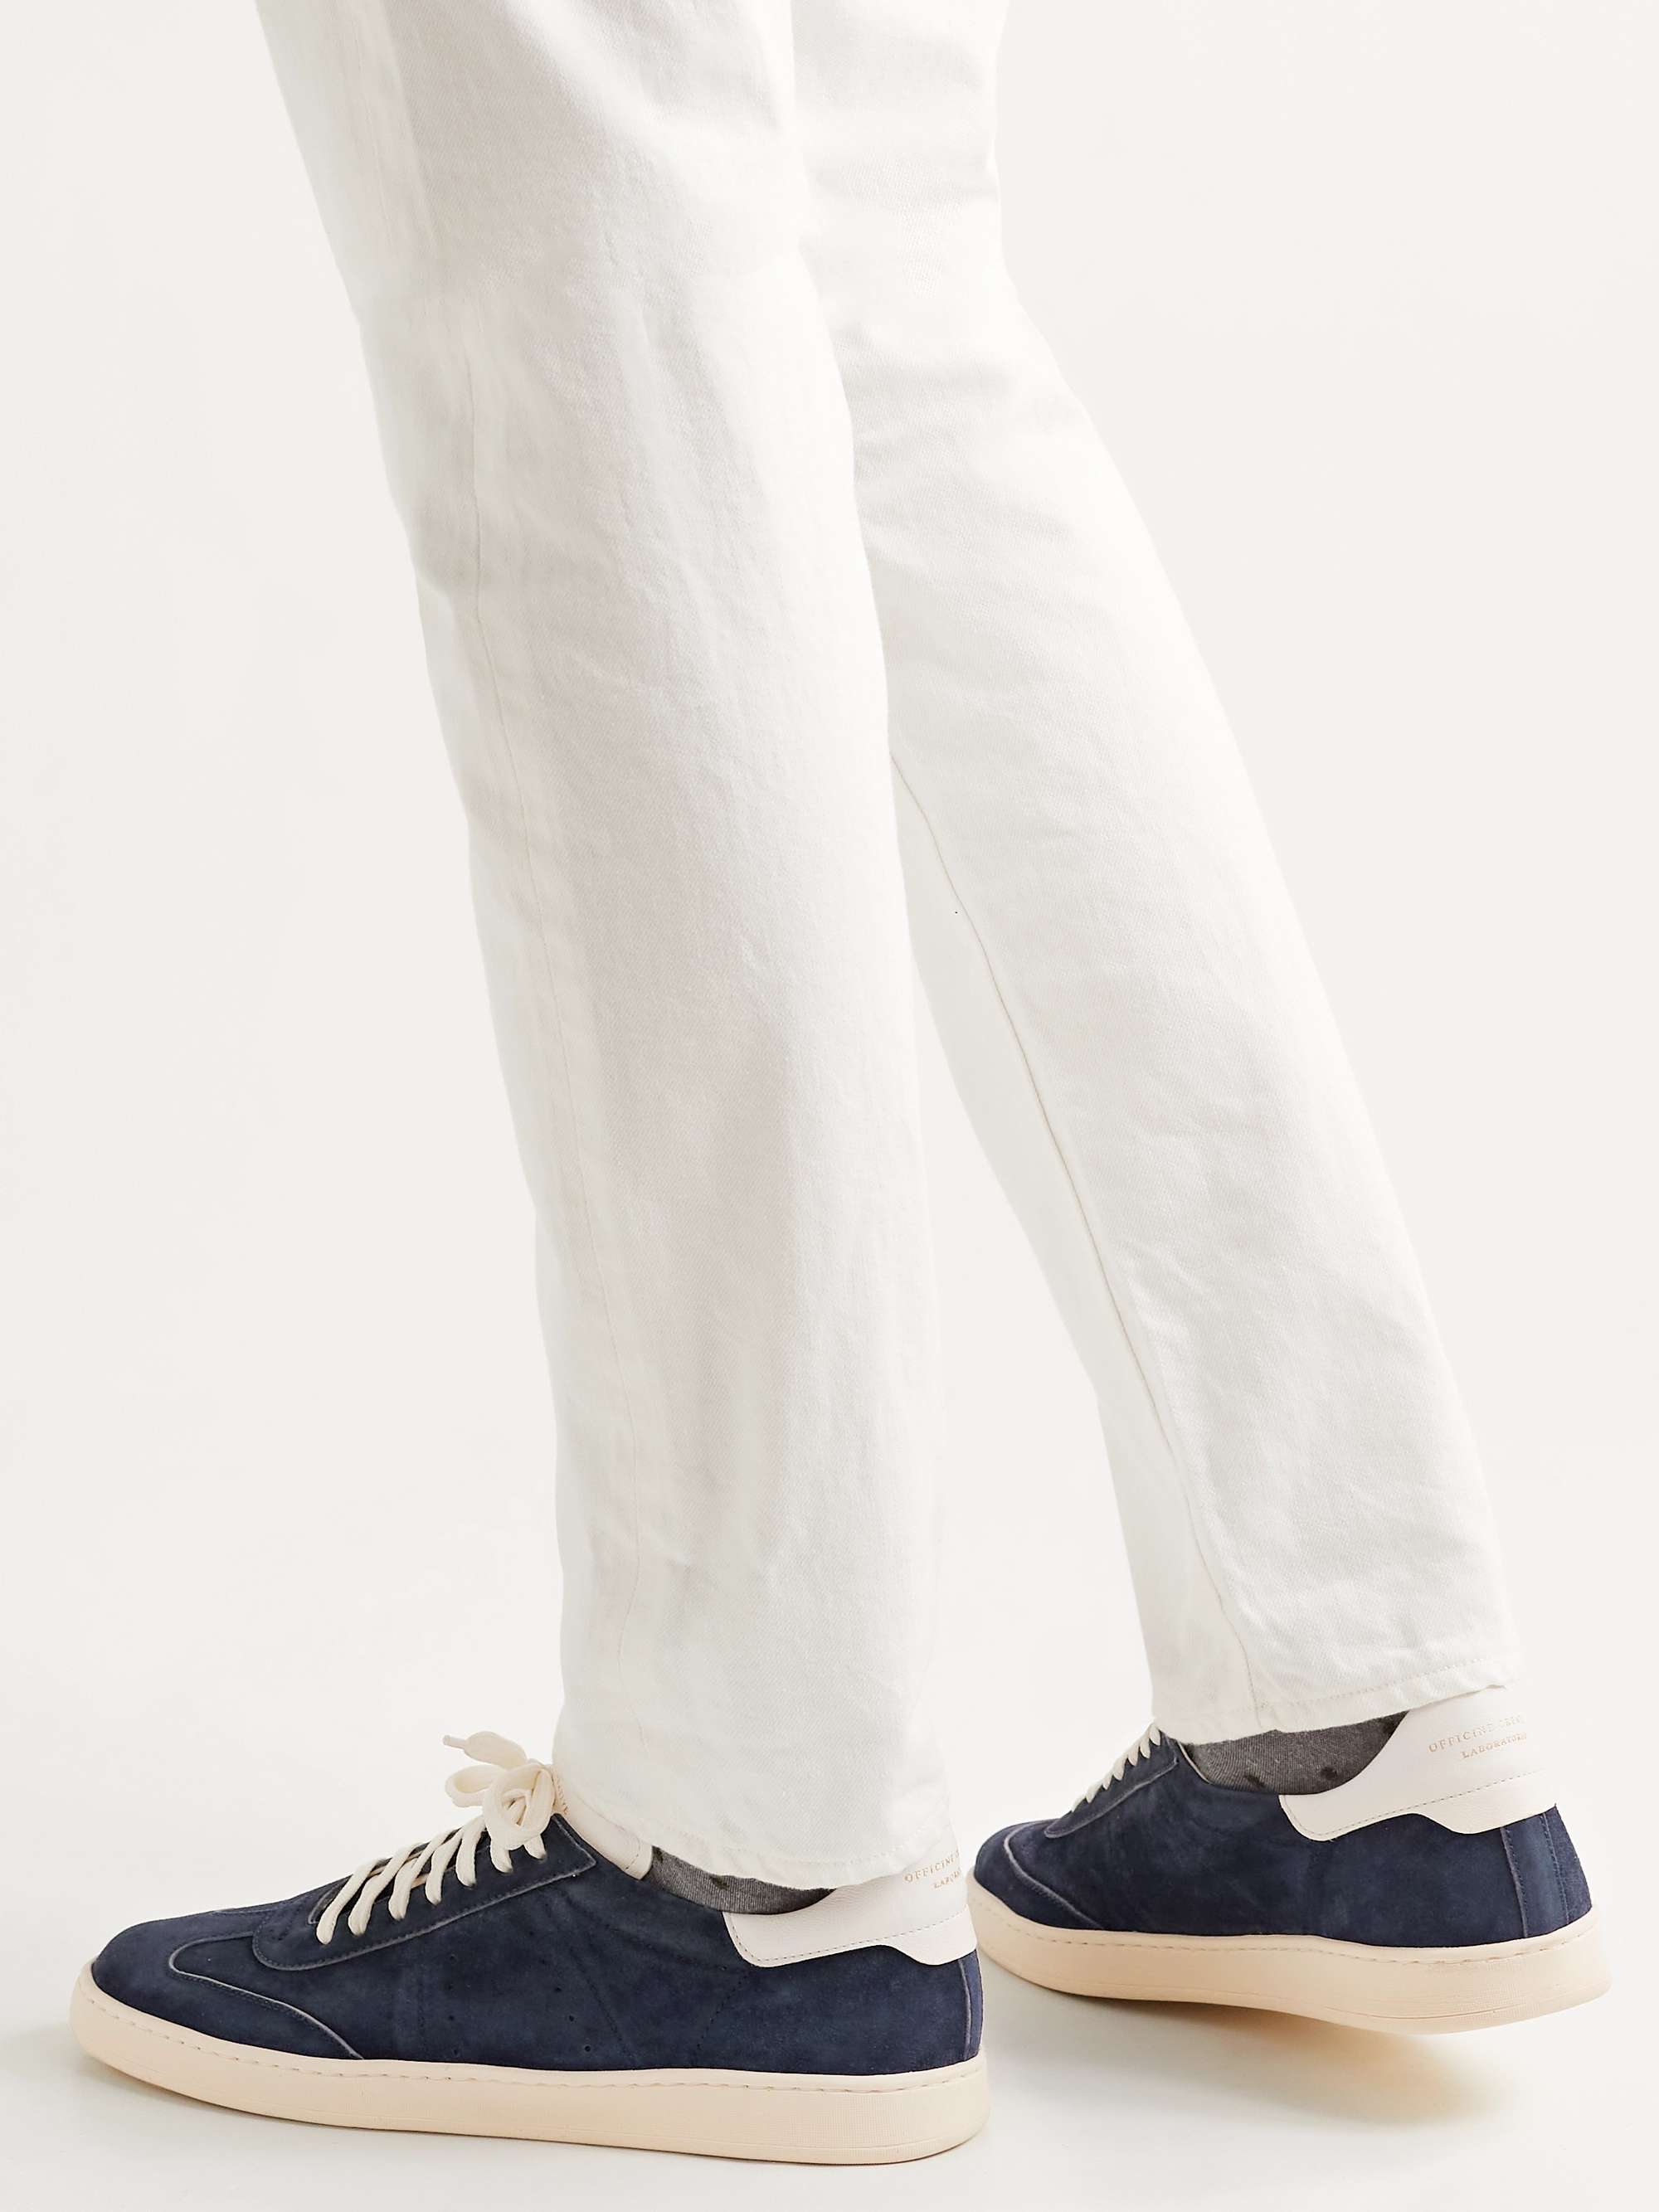 OFFICINE CREATIVE Kombo Leather-Trimmed Suede Sneakers for Men | MR PORTER